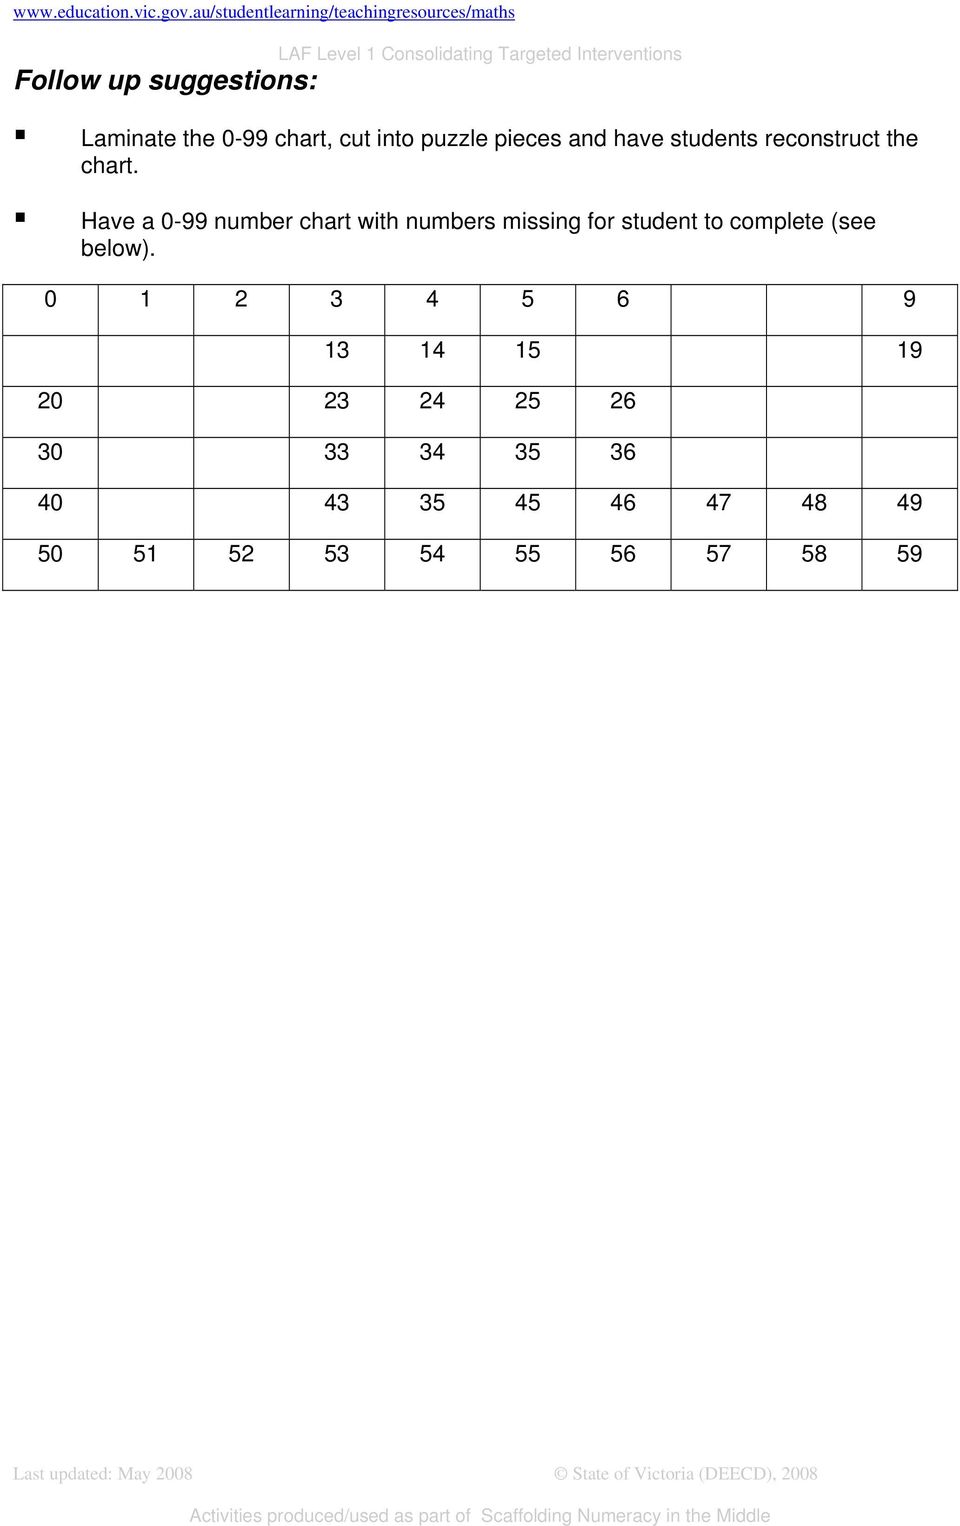 Have a 0-99 number chart with numbers missing for student to complete (see